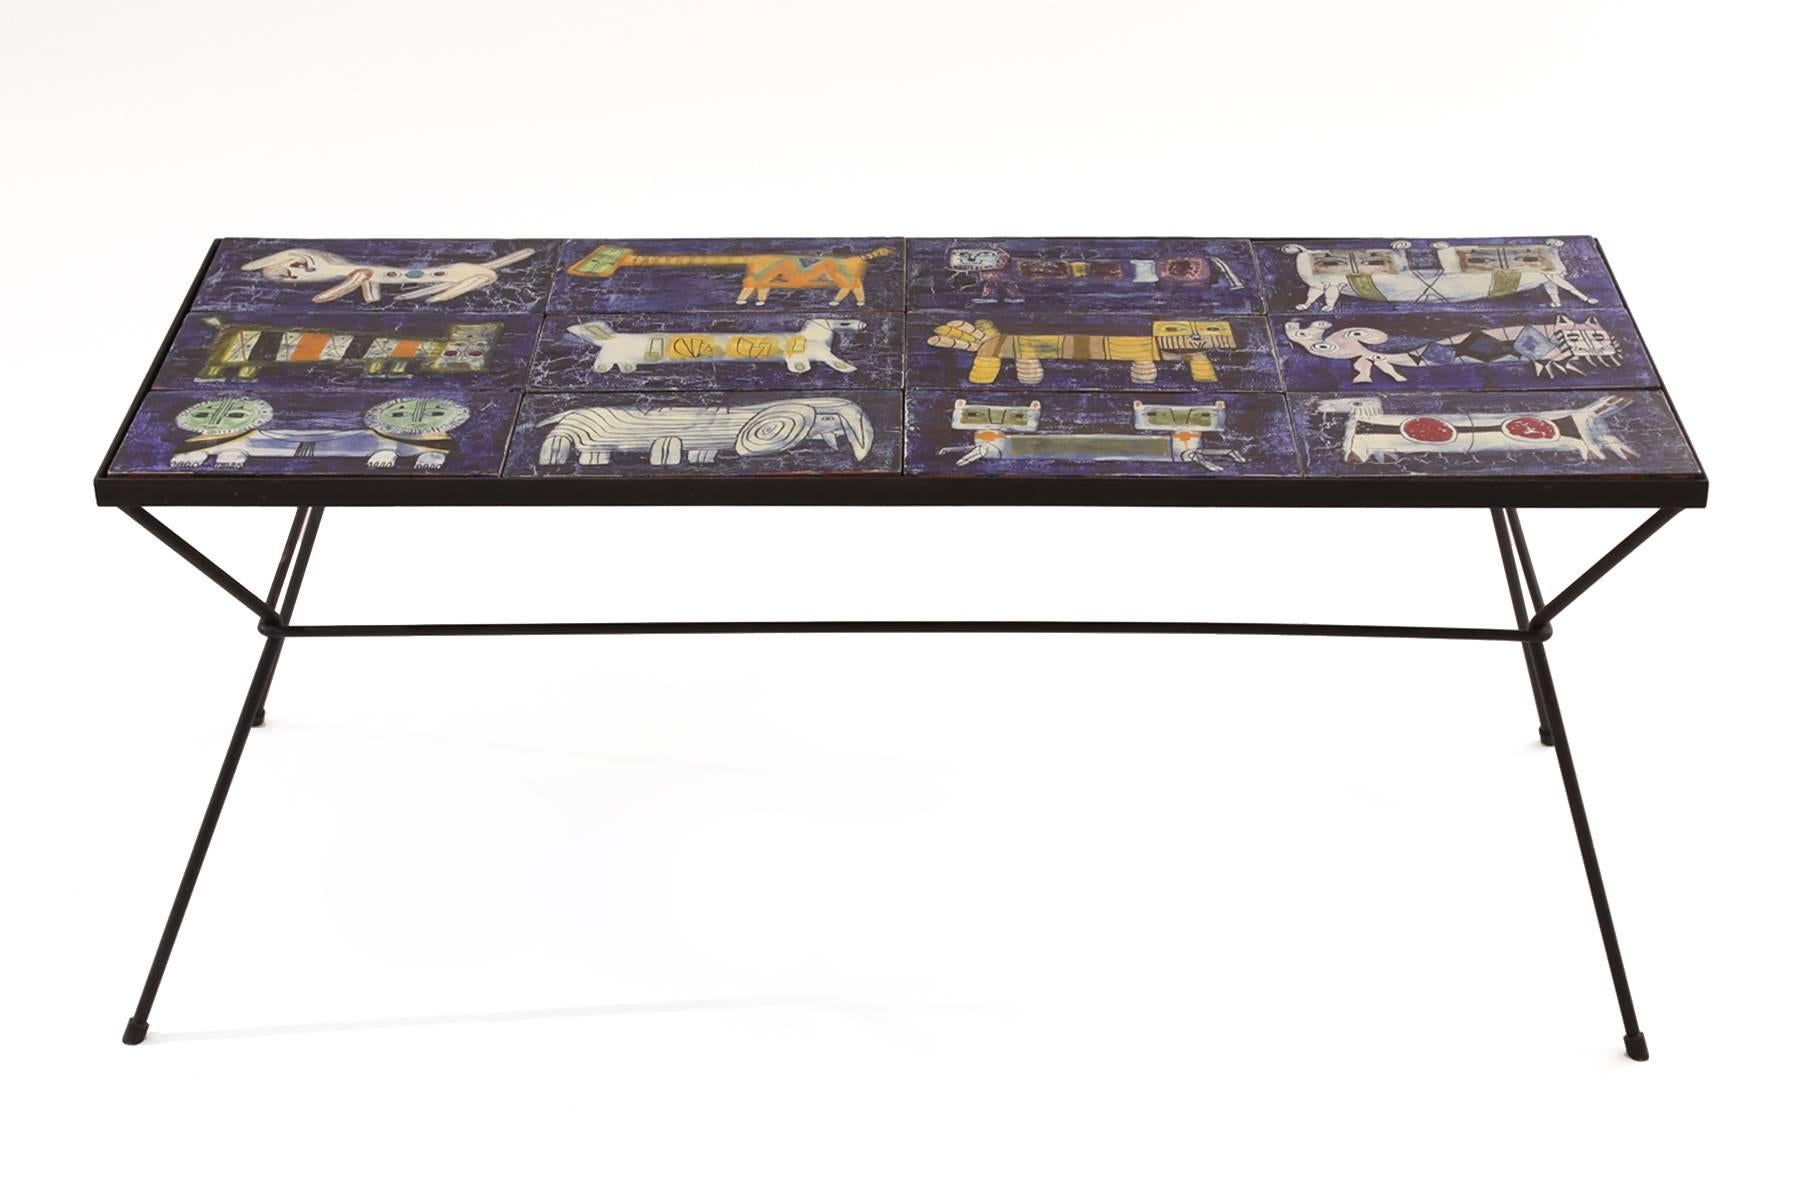 Ceramic tile and wrought iron coffee table from Italy, circa late 1950s. This example is composed of 12 hand-painted and glazed animal motif ceramic tiles inset in a patinated iron table base. The tiles are loose so can be arranged in the pattern of